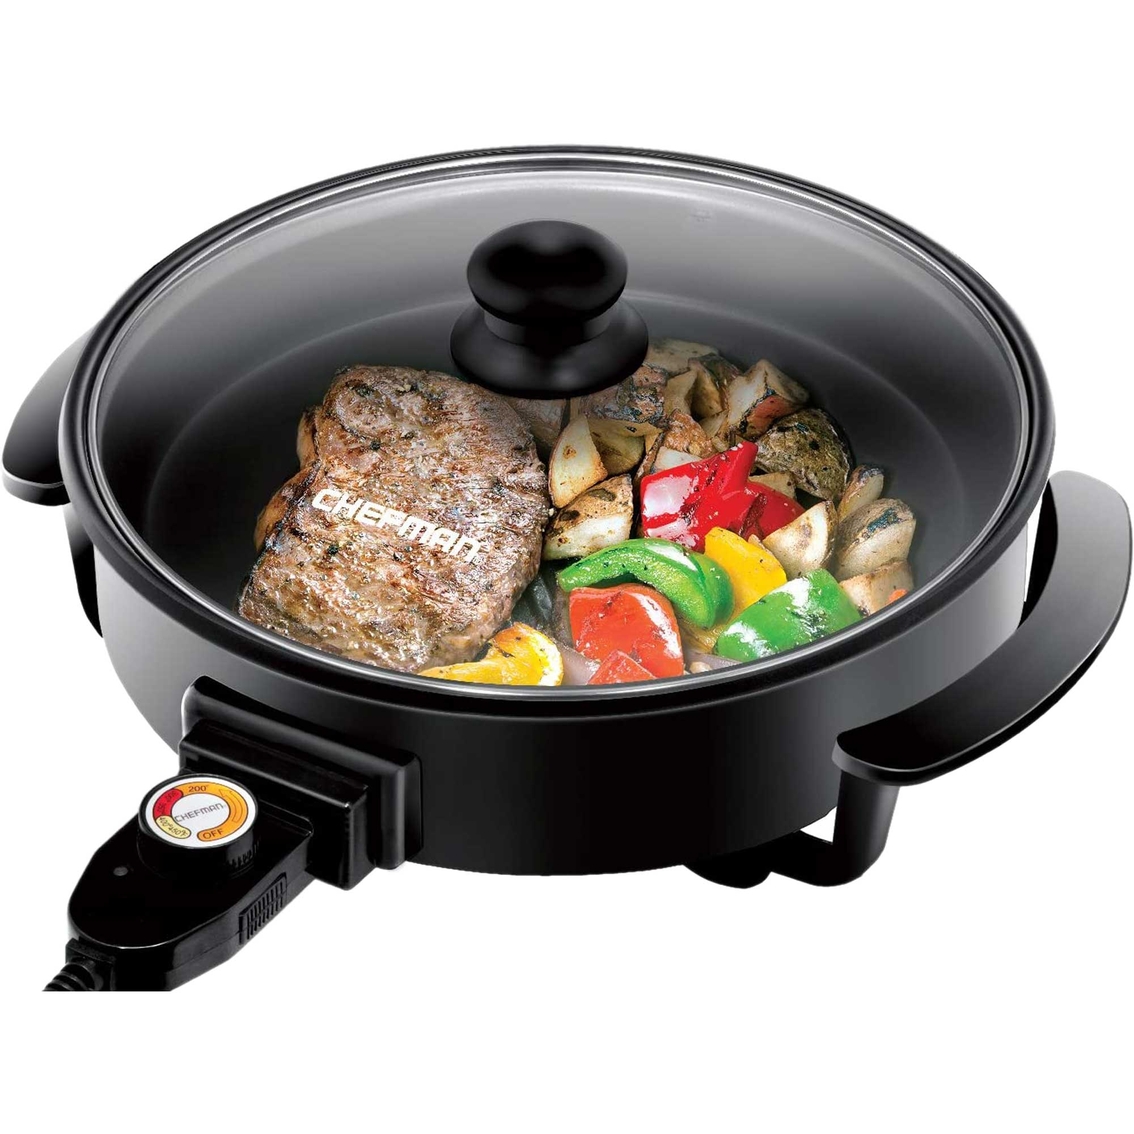 Chefman 12 in. Electric Skillet - Image 2 of 2